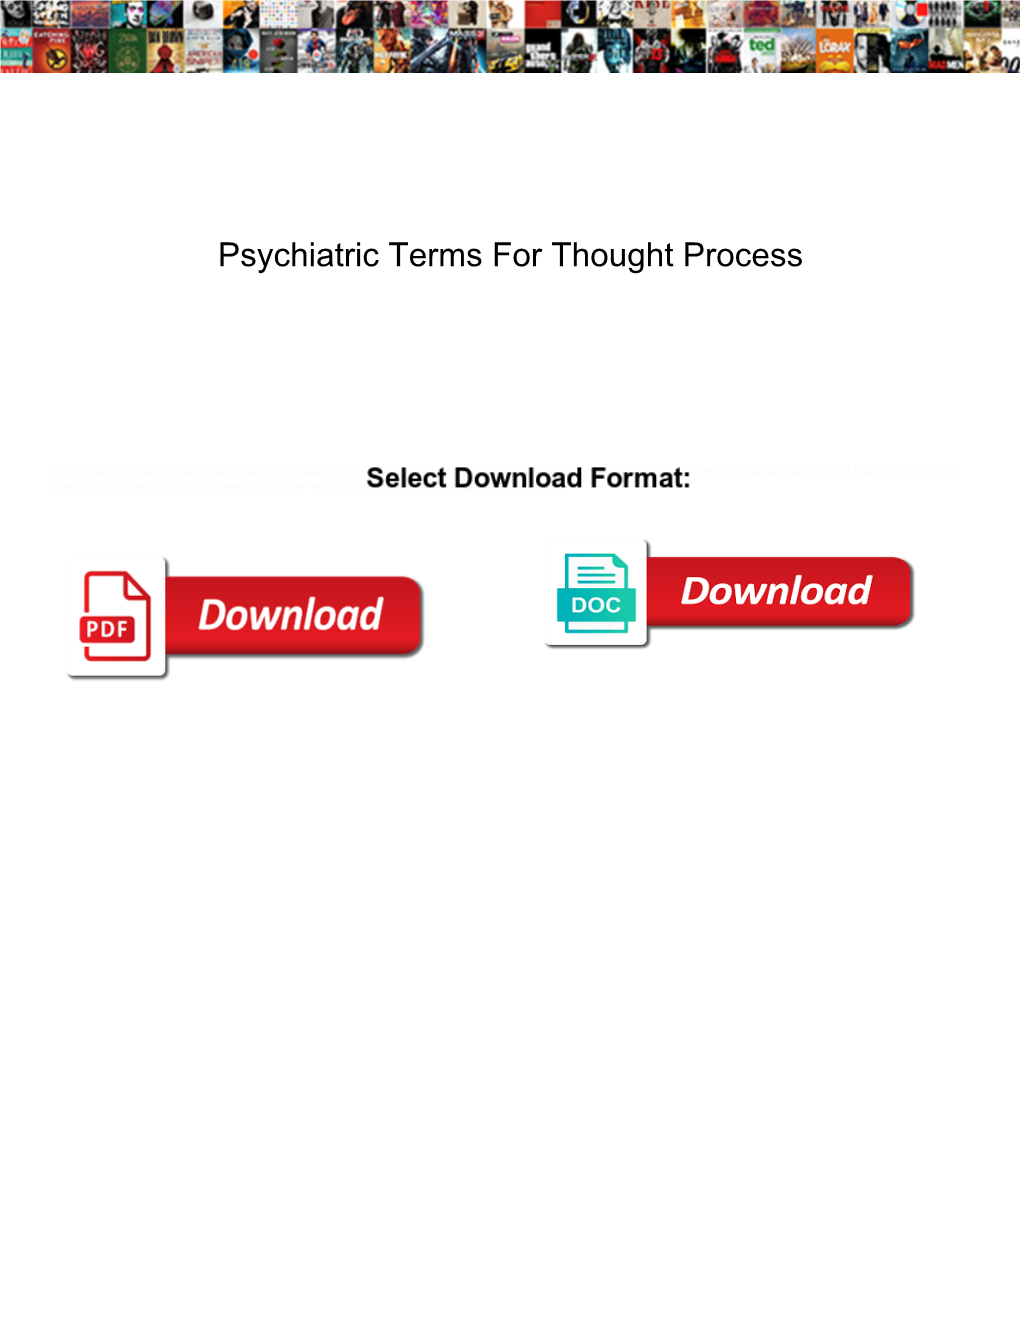 Psychiatric Terms for Thought Process